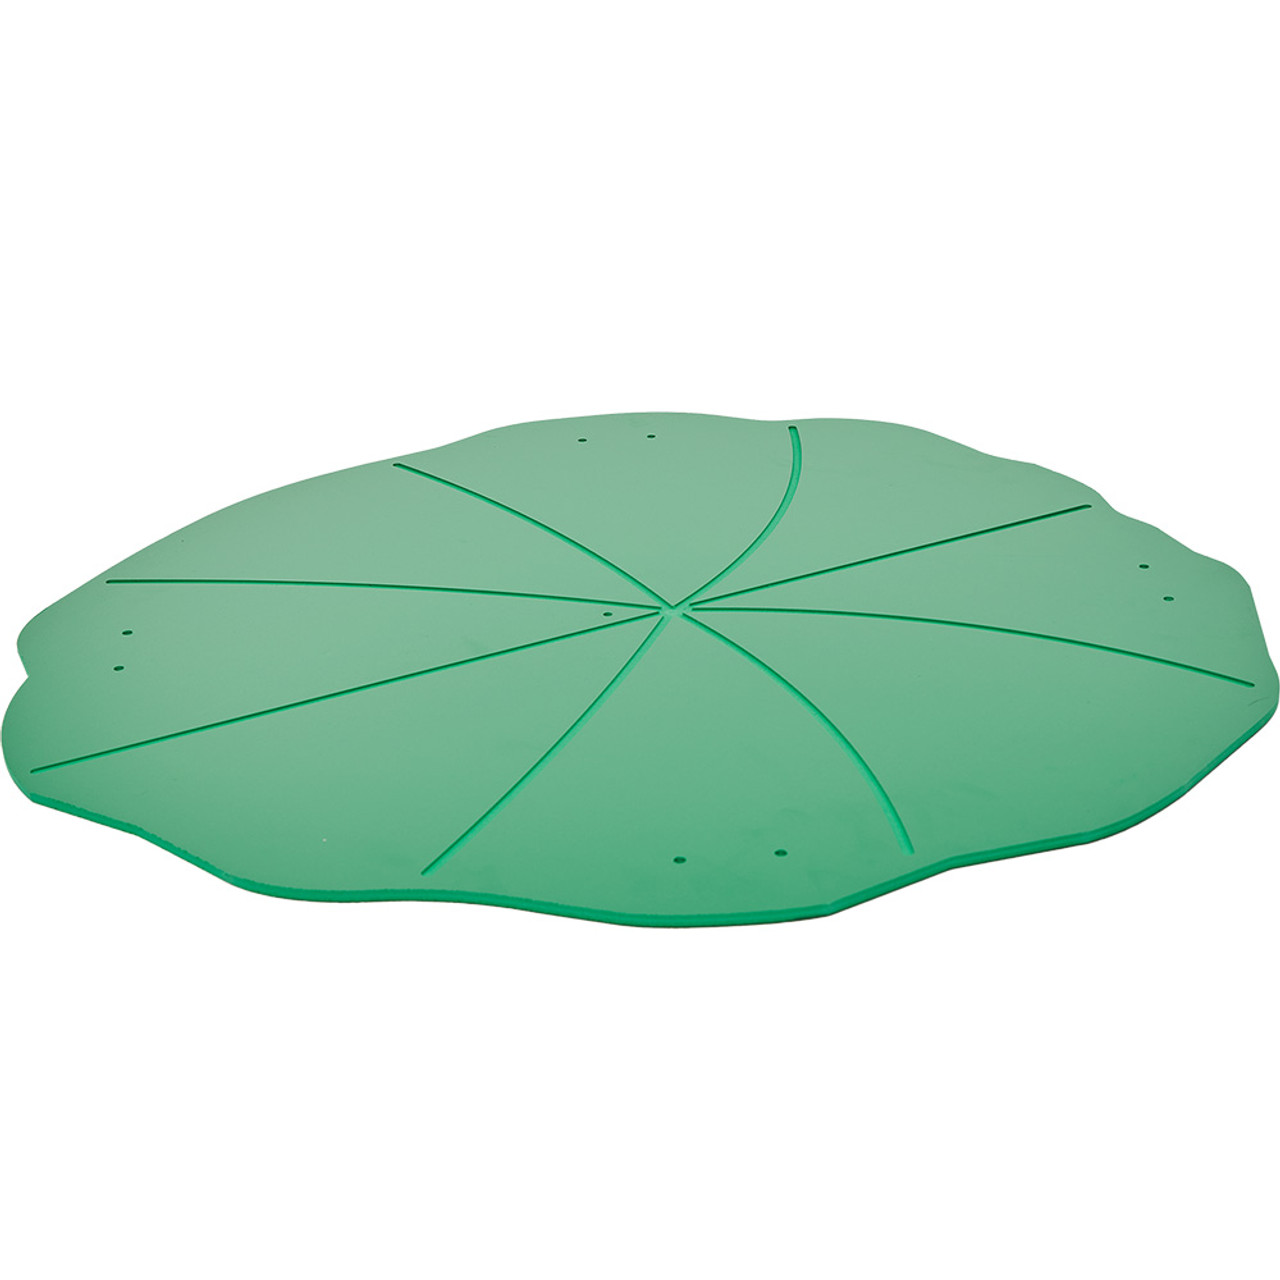 Texas-Angler-Lily-Pads-Artificial-Habitat-6-Pack